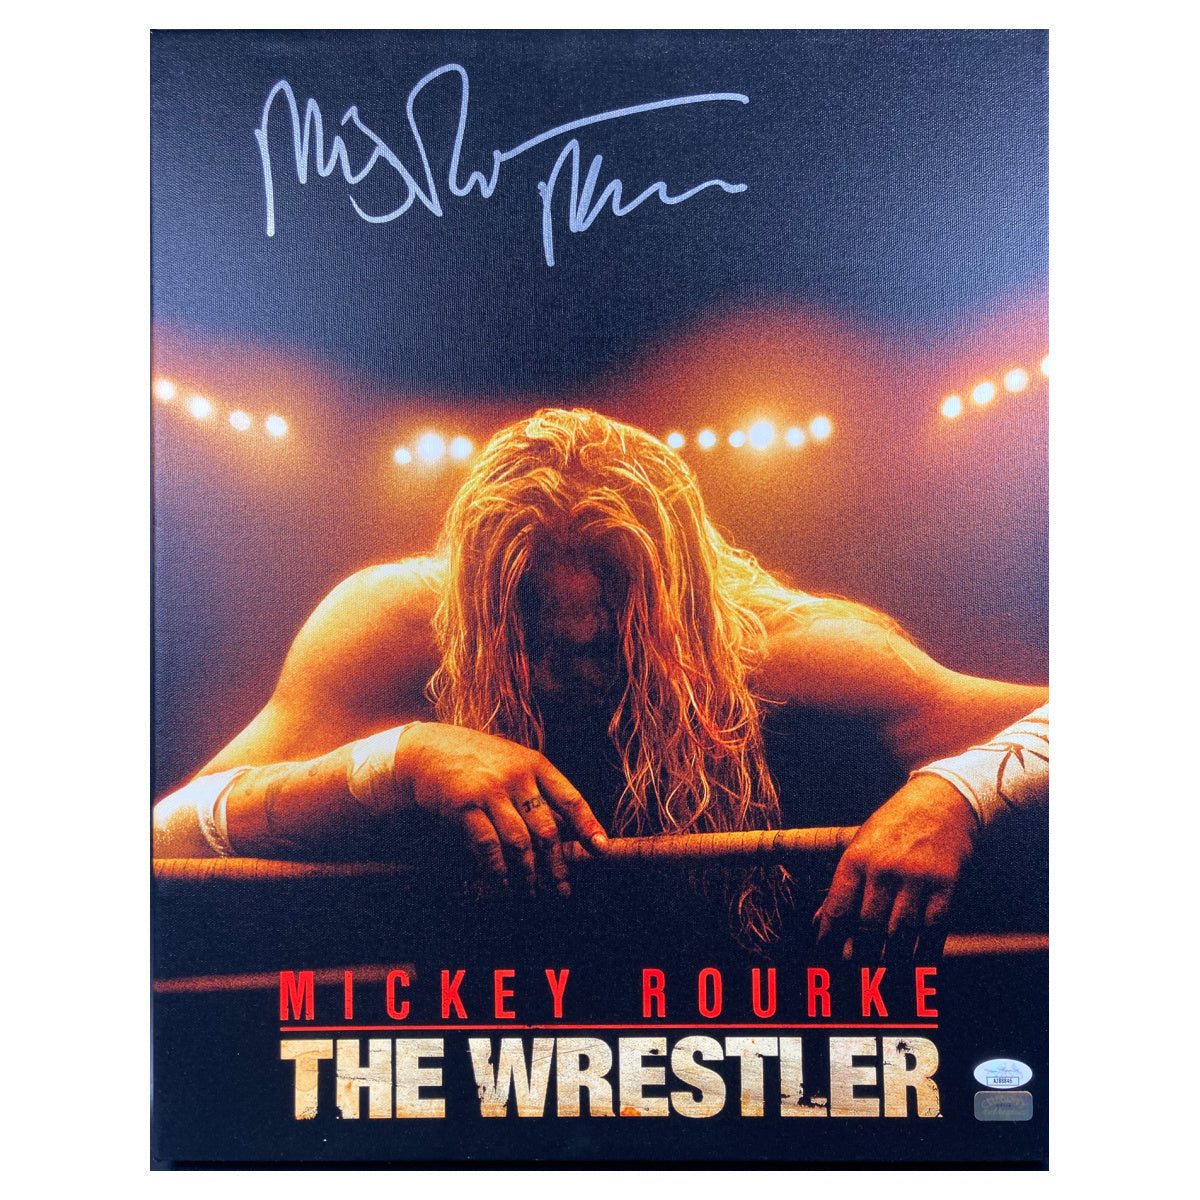 MICKEY ROURKE SIGNED 16X20 CANVAS THE WRESTLER AUTOGRAPHED JSA COA